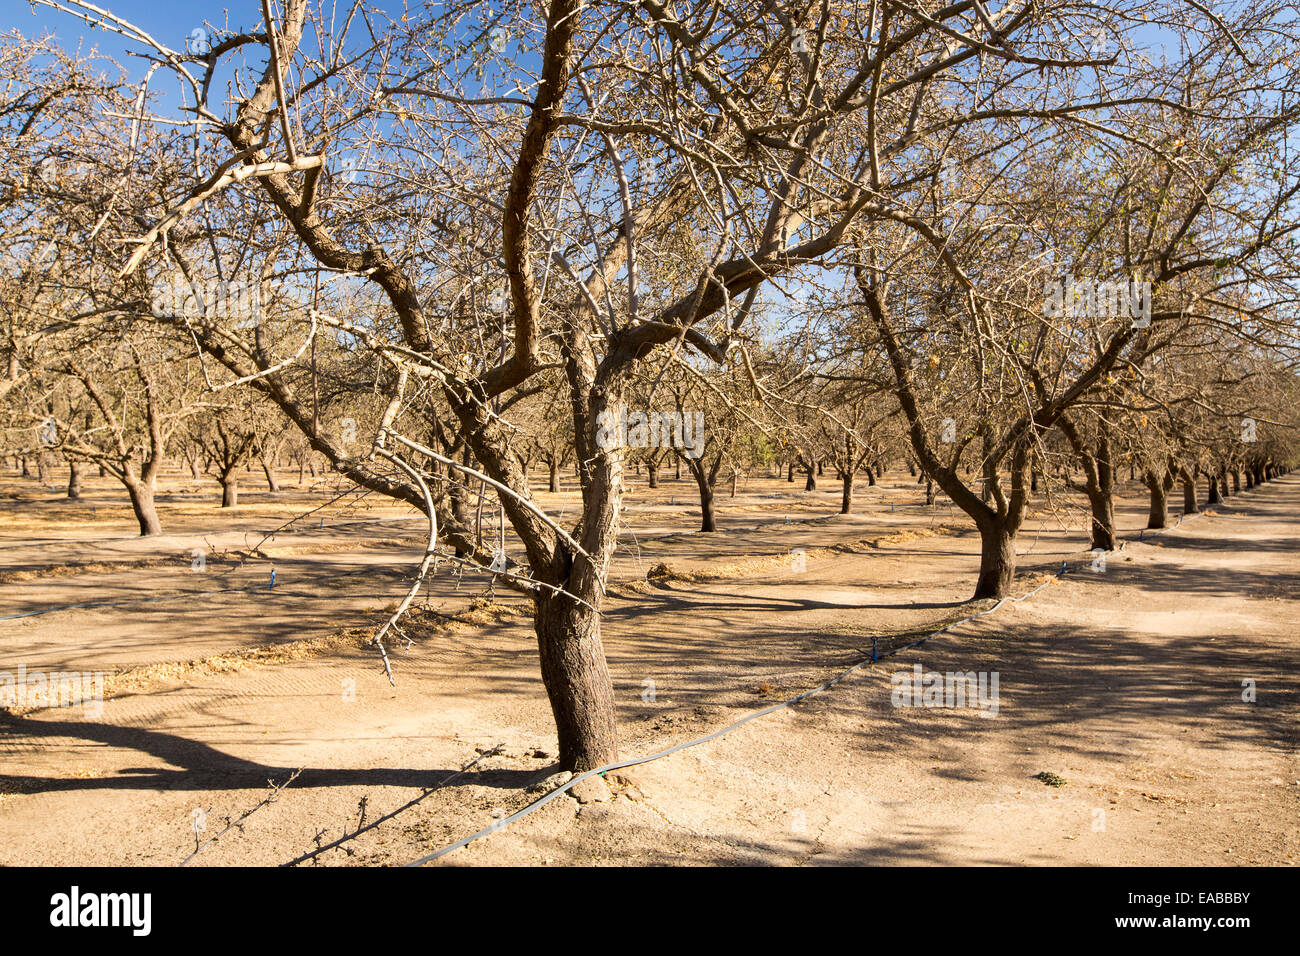 dead-and-dying-almond-trees-in-almond-groves-in-wasco-in-the-central-EABBBY.jpg